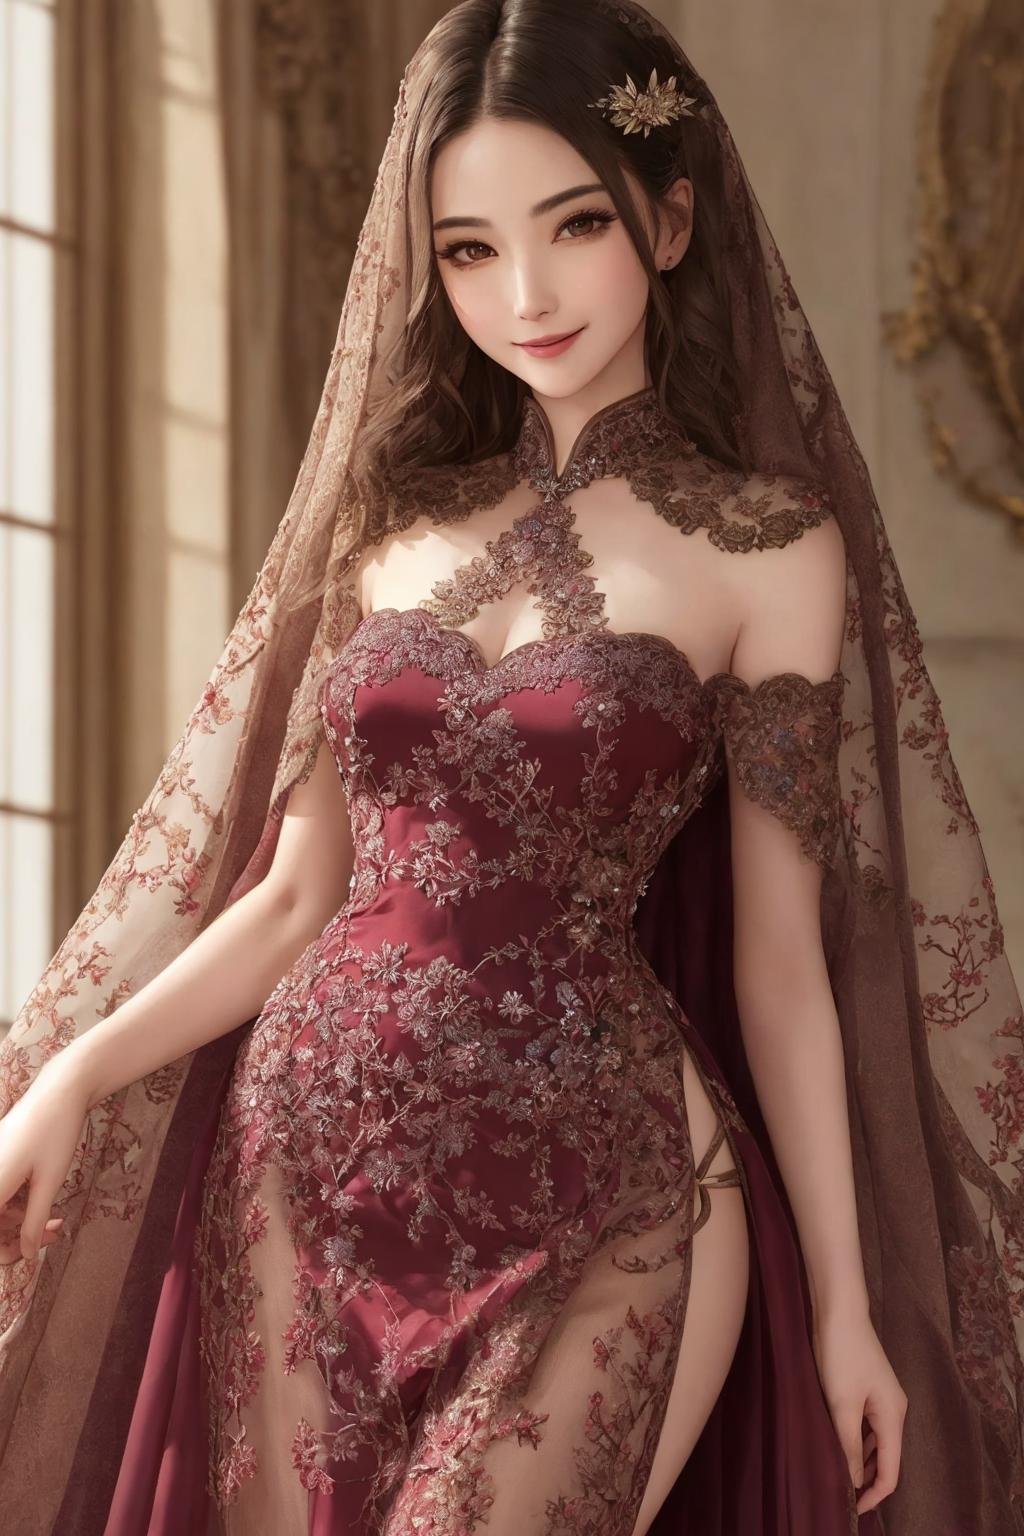 Masterpiece, absurdres, fine detail, HDR, highly detailed face and eyes, photorealistic, solo,1girl,smilingedgCoquine,Haute_Couture, [lingerie|dress], woman wearing a [Haute_Couture|edgCoquine] dress, front view, superb embroidery,designer dress, <lora:CoquineCouture:0.88>